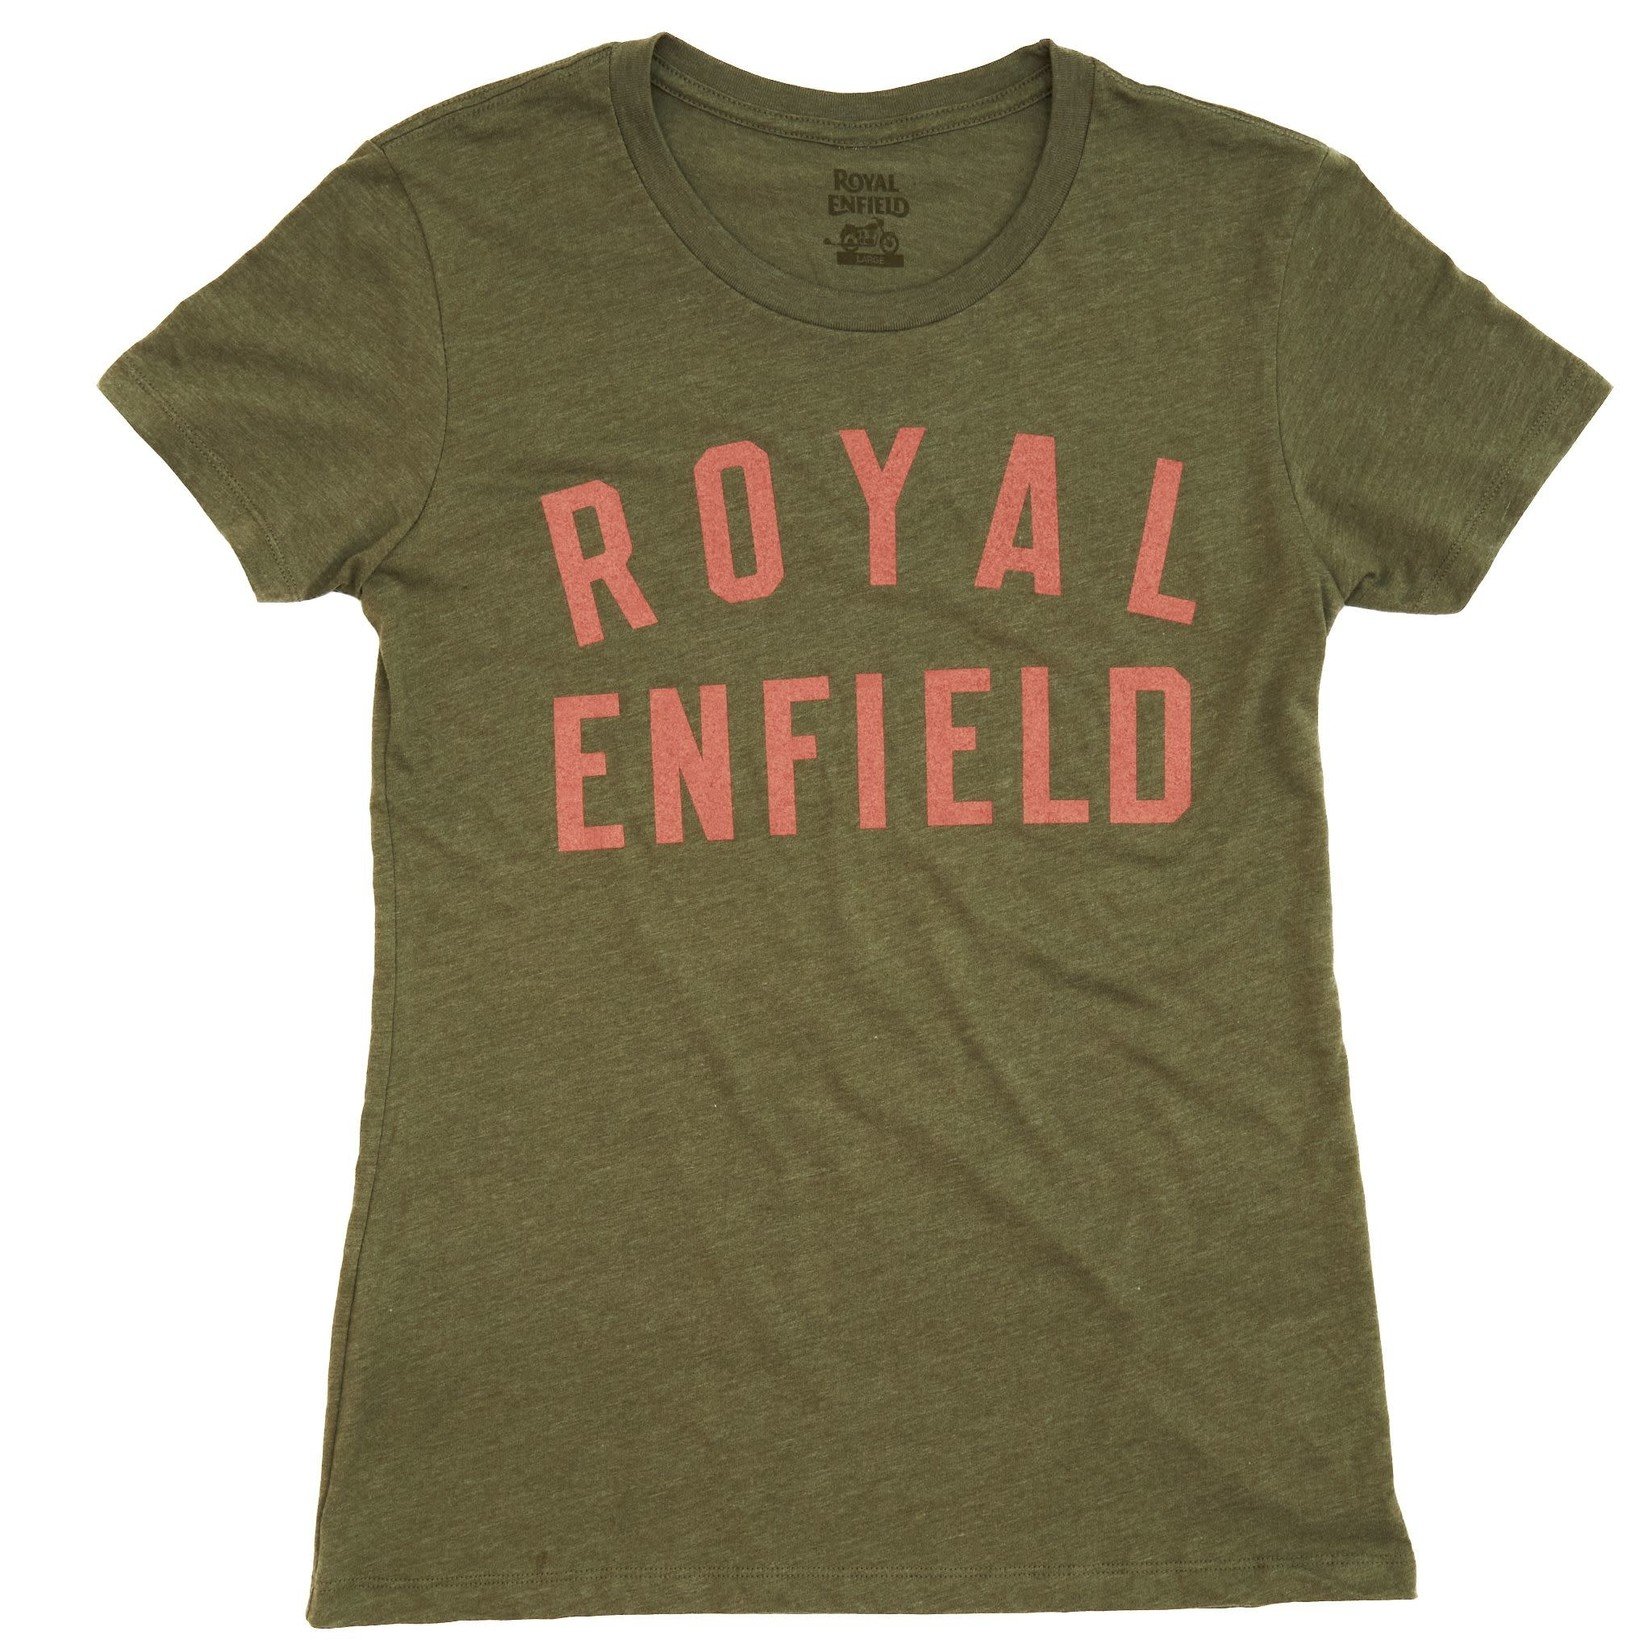 Royal Enfield English Chic Forest - RE shirt